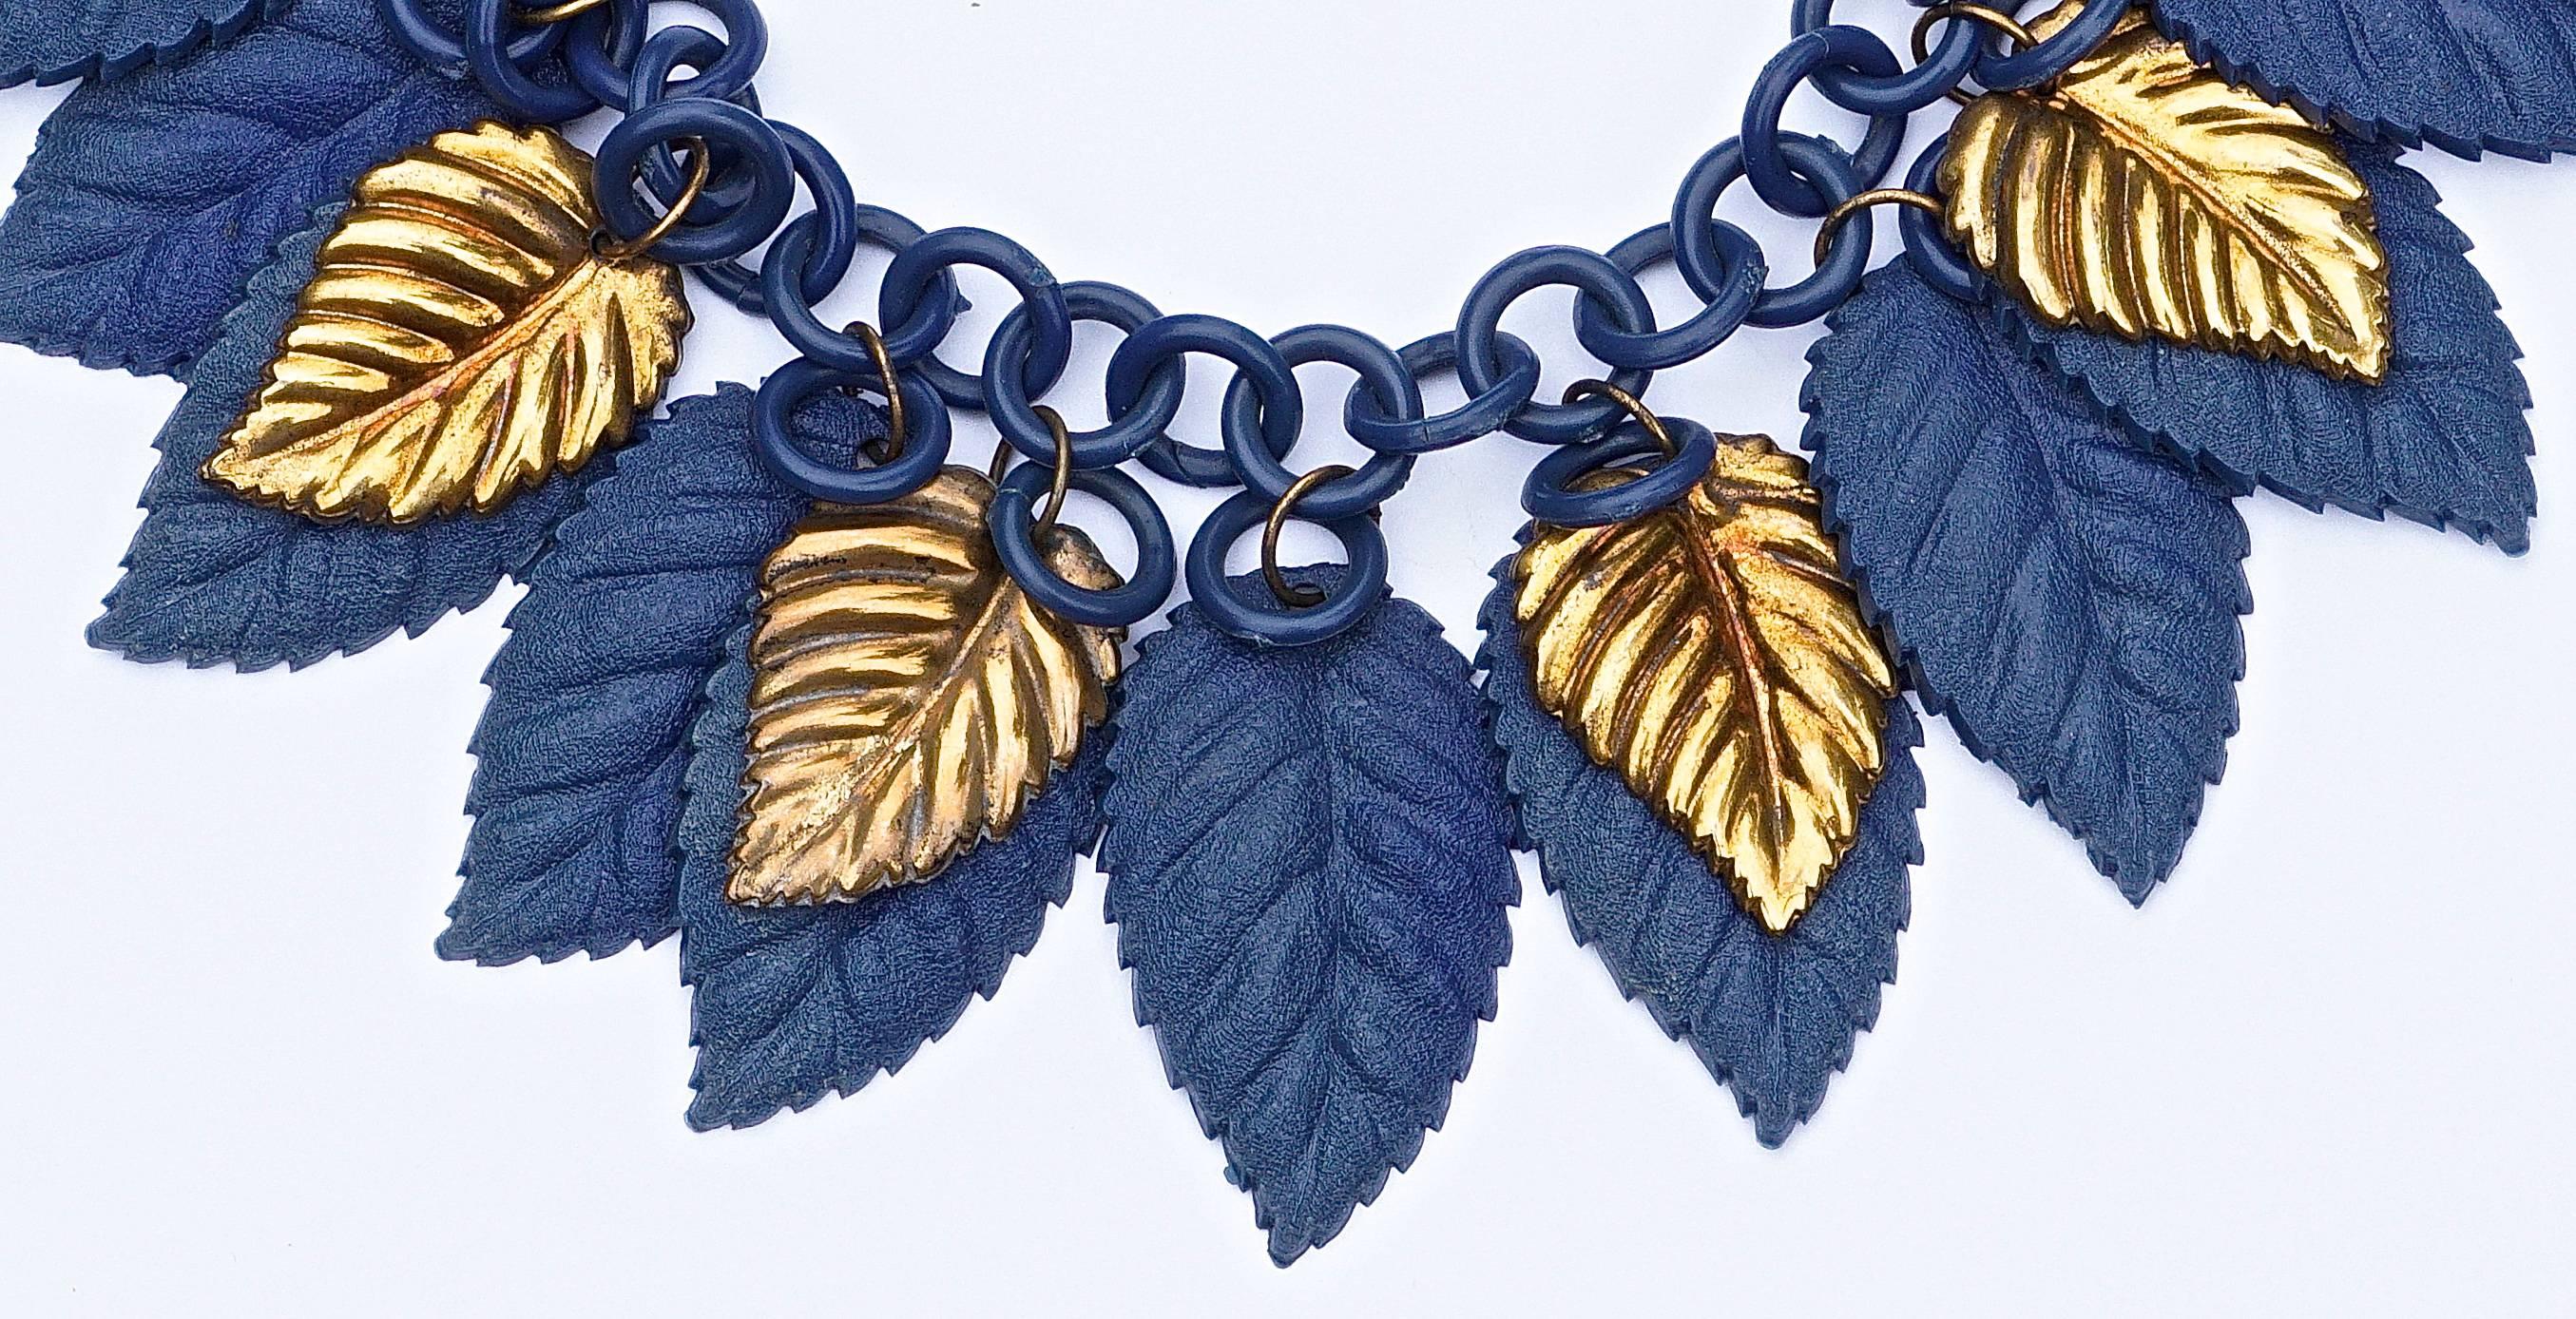 Wonderful celluloid necklace, with dark blue plastic and gold tone metal leaves dropping from the link chain. Length 40.5cm / 15.94 inches. The stylish leaves measure length 4.1 cm /  1.6 inches by 2.5 cm / .98 inch, and the chain links are diameter